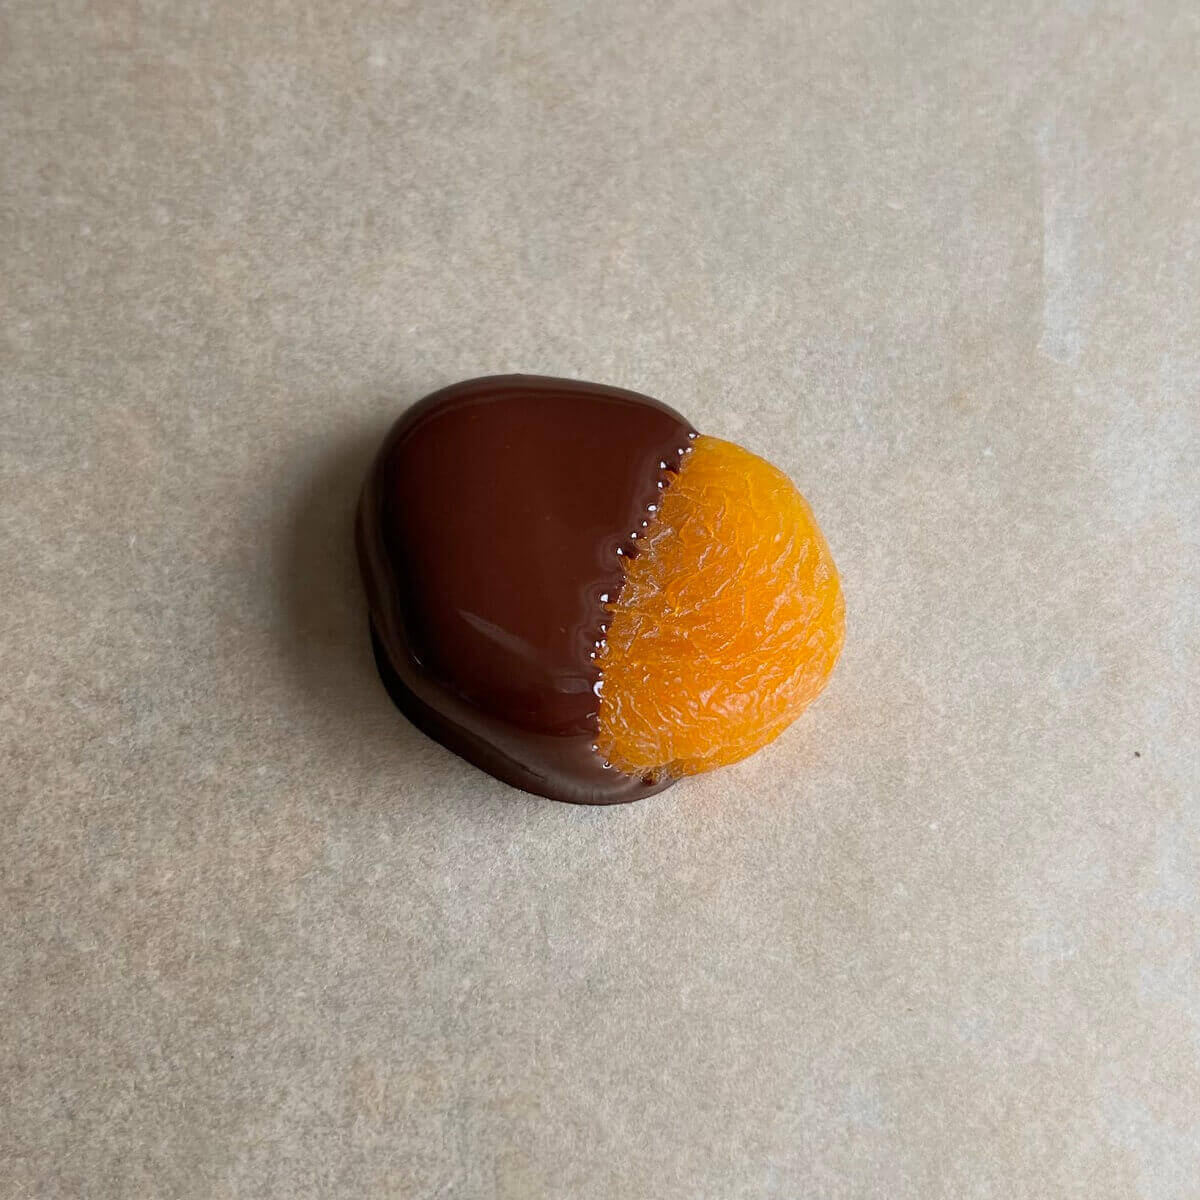 A dried apricot dipped in melted chocolate.